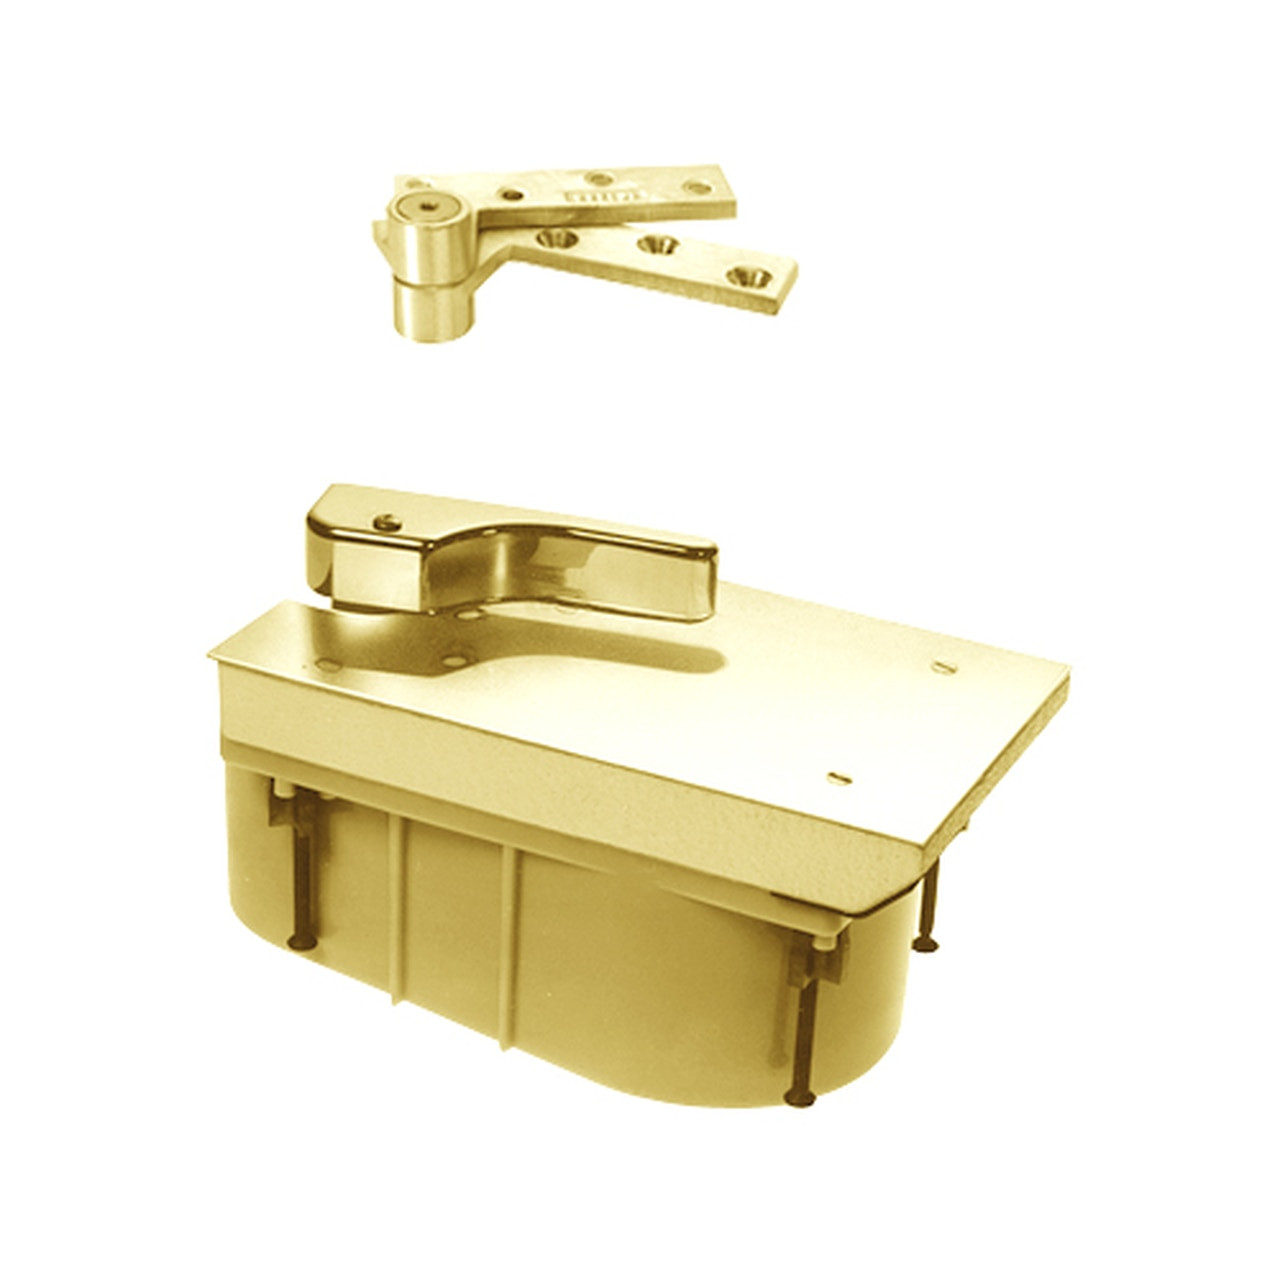 FQ27-105N-LFP-LH-605 Rixson 27 Series Heavy Duty Quick Install Offset Hung Floor Closer in Bright Brass Finish